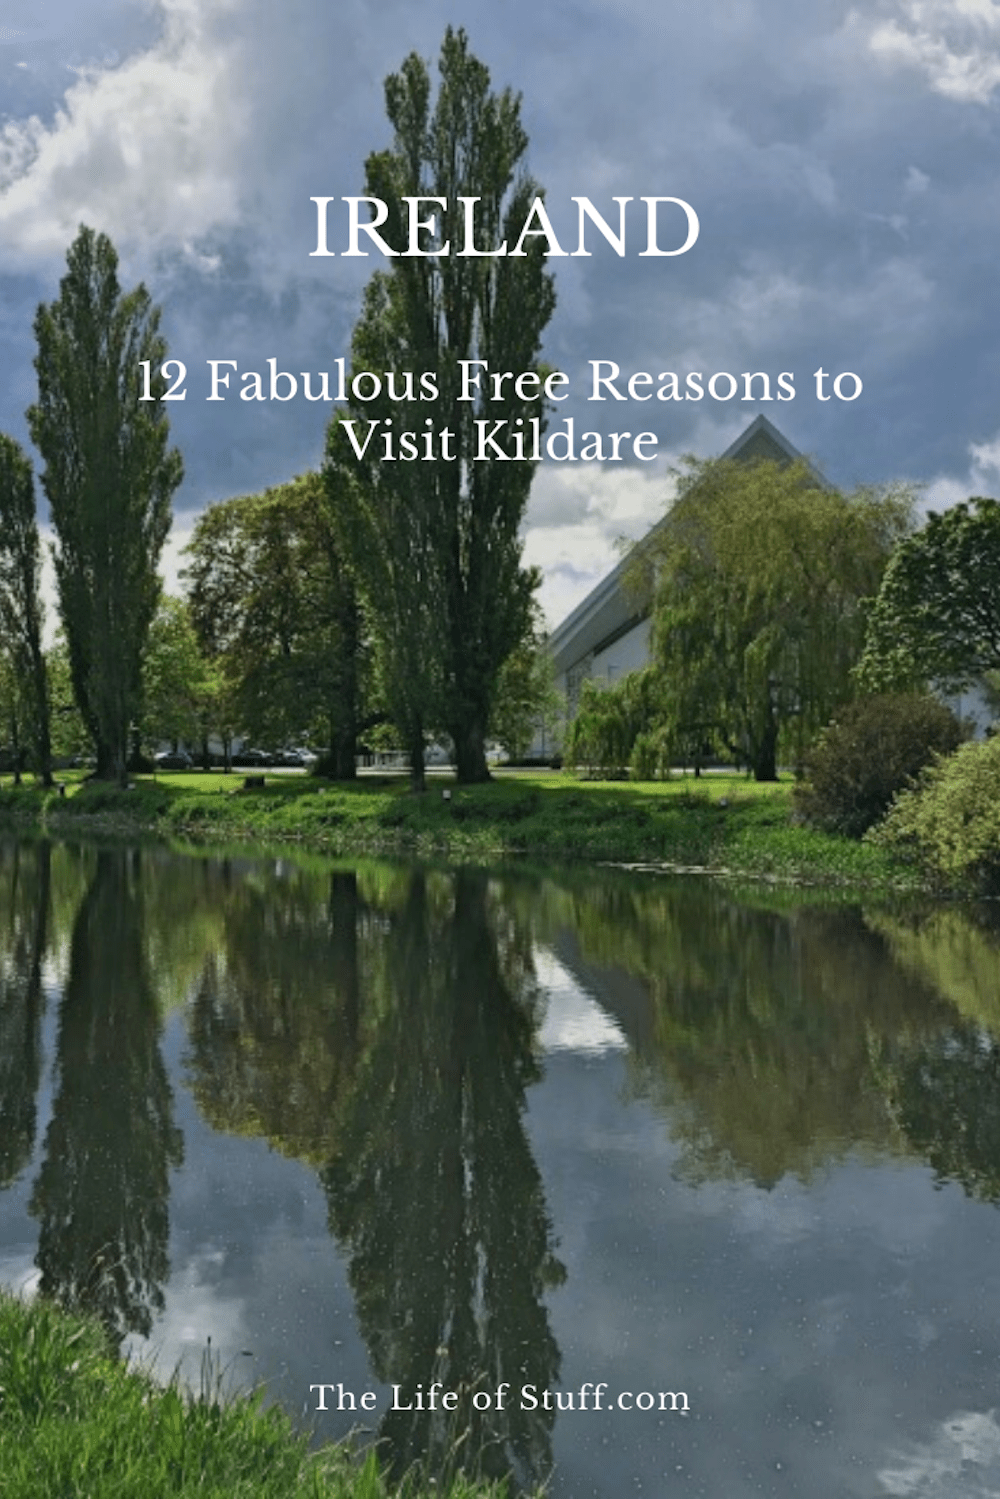 Visit Kildare - 12 Fabulous Free Things to Do Outdoors - The Life of Stuff.com